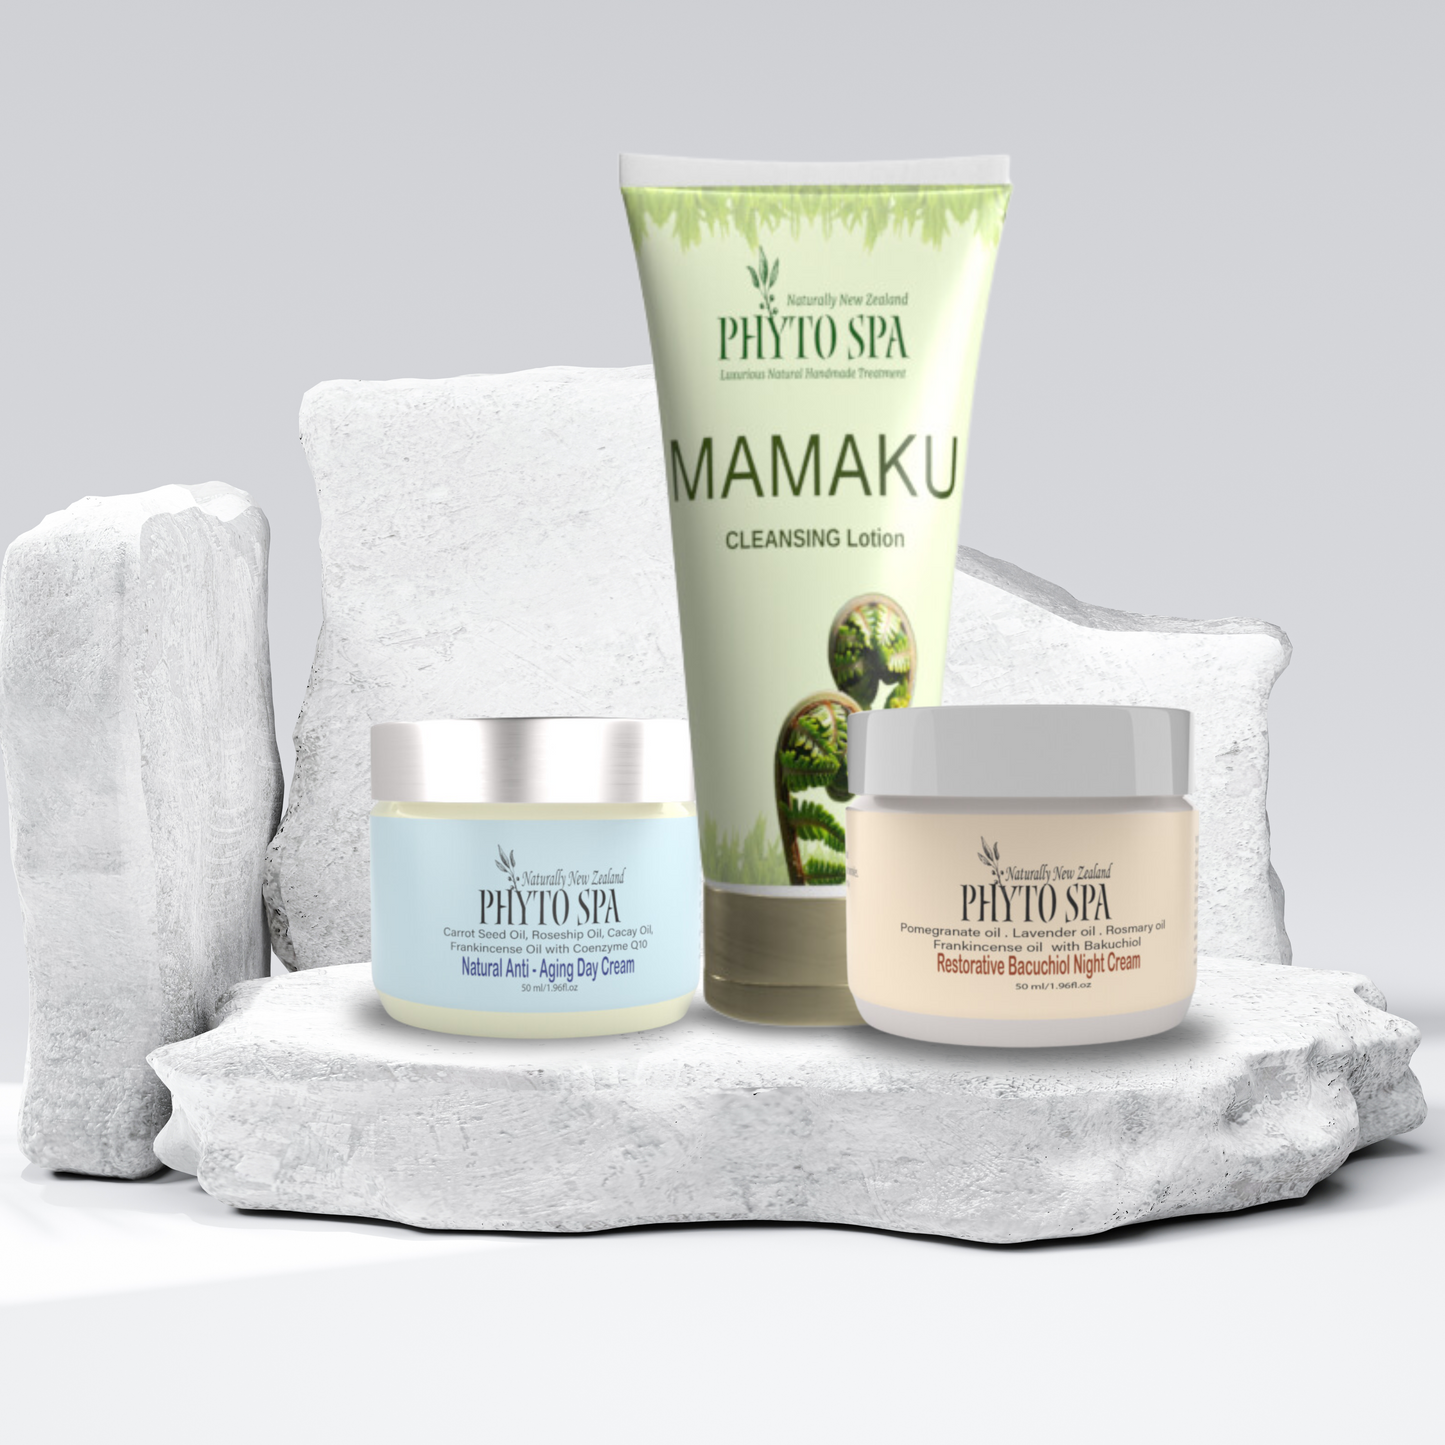 Anti-Aging Collection: Anti-aging Day Cream, Bakuchiol Night Cream and Mamaku Cleansing Lotion